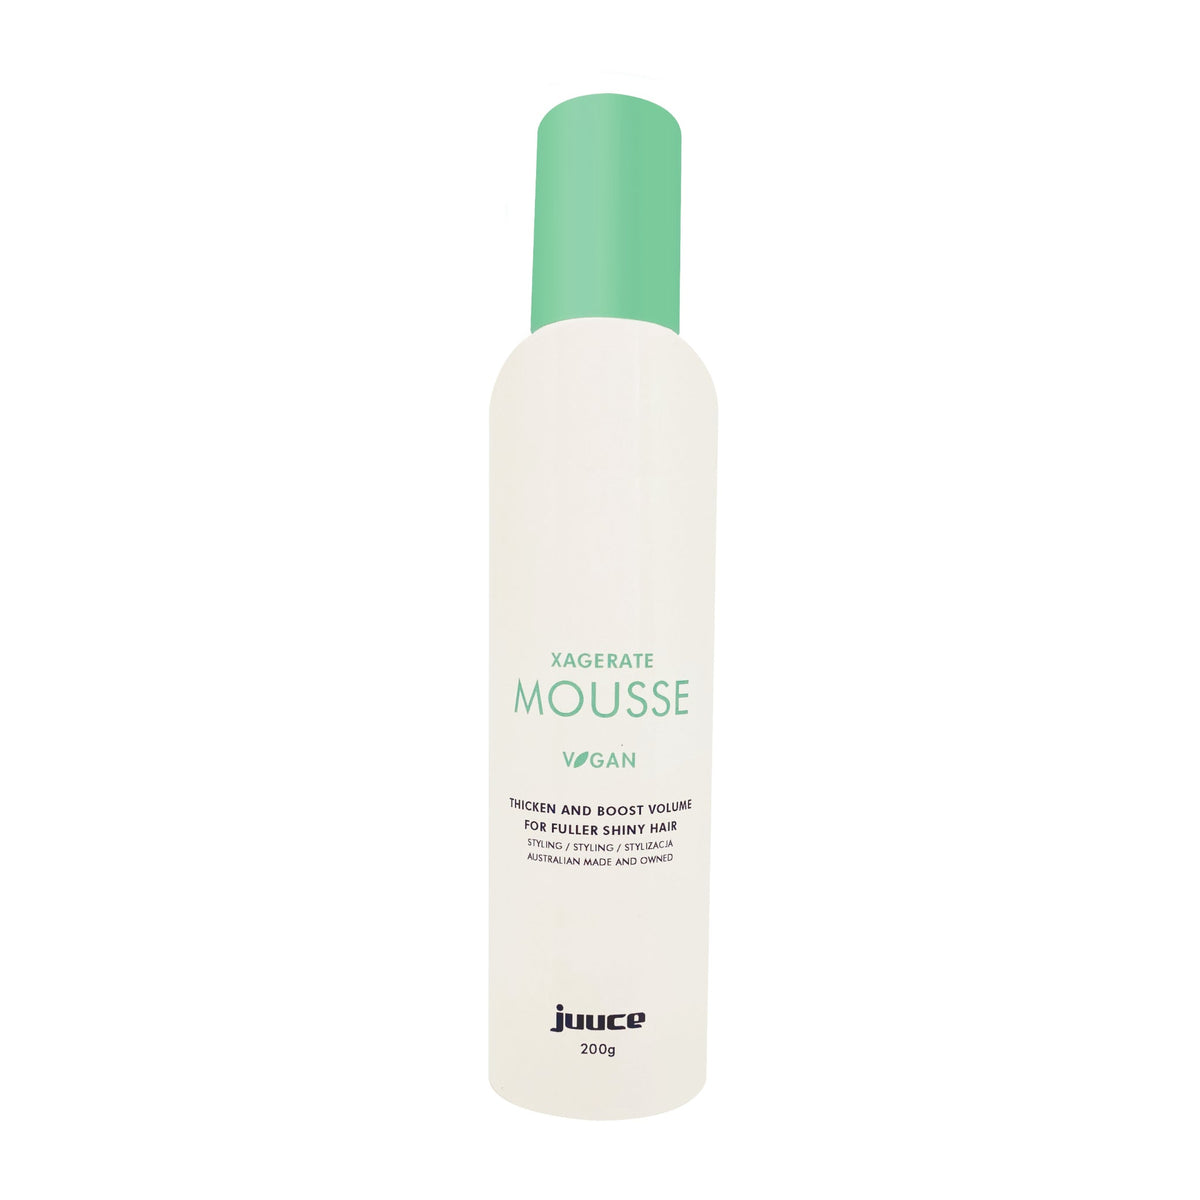 Juuce Xagerate Mousse - Haircare Superstore